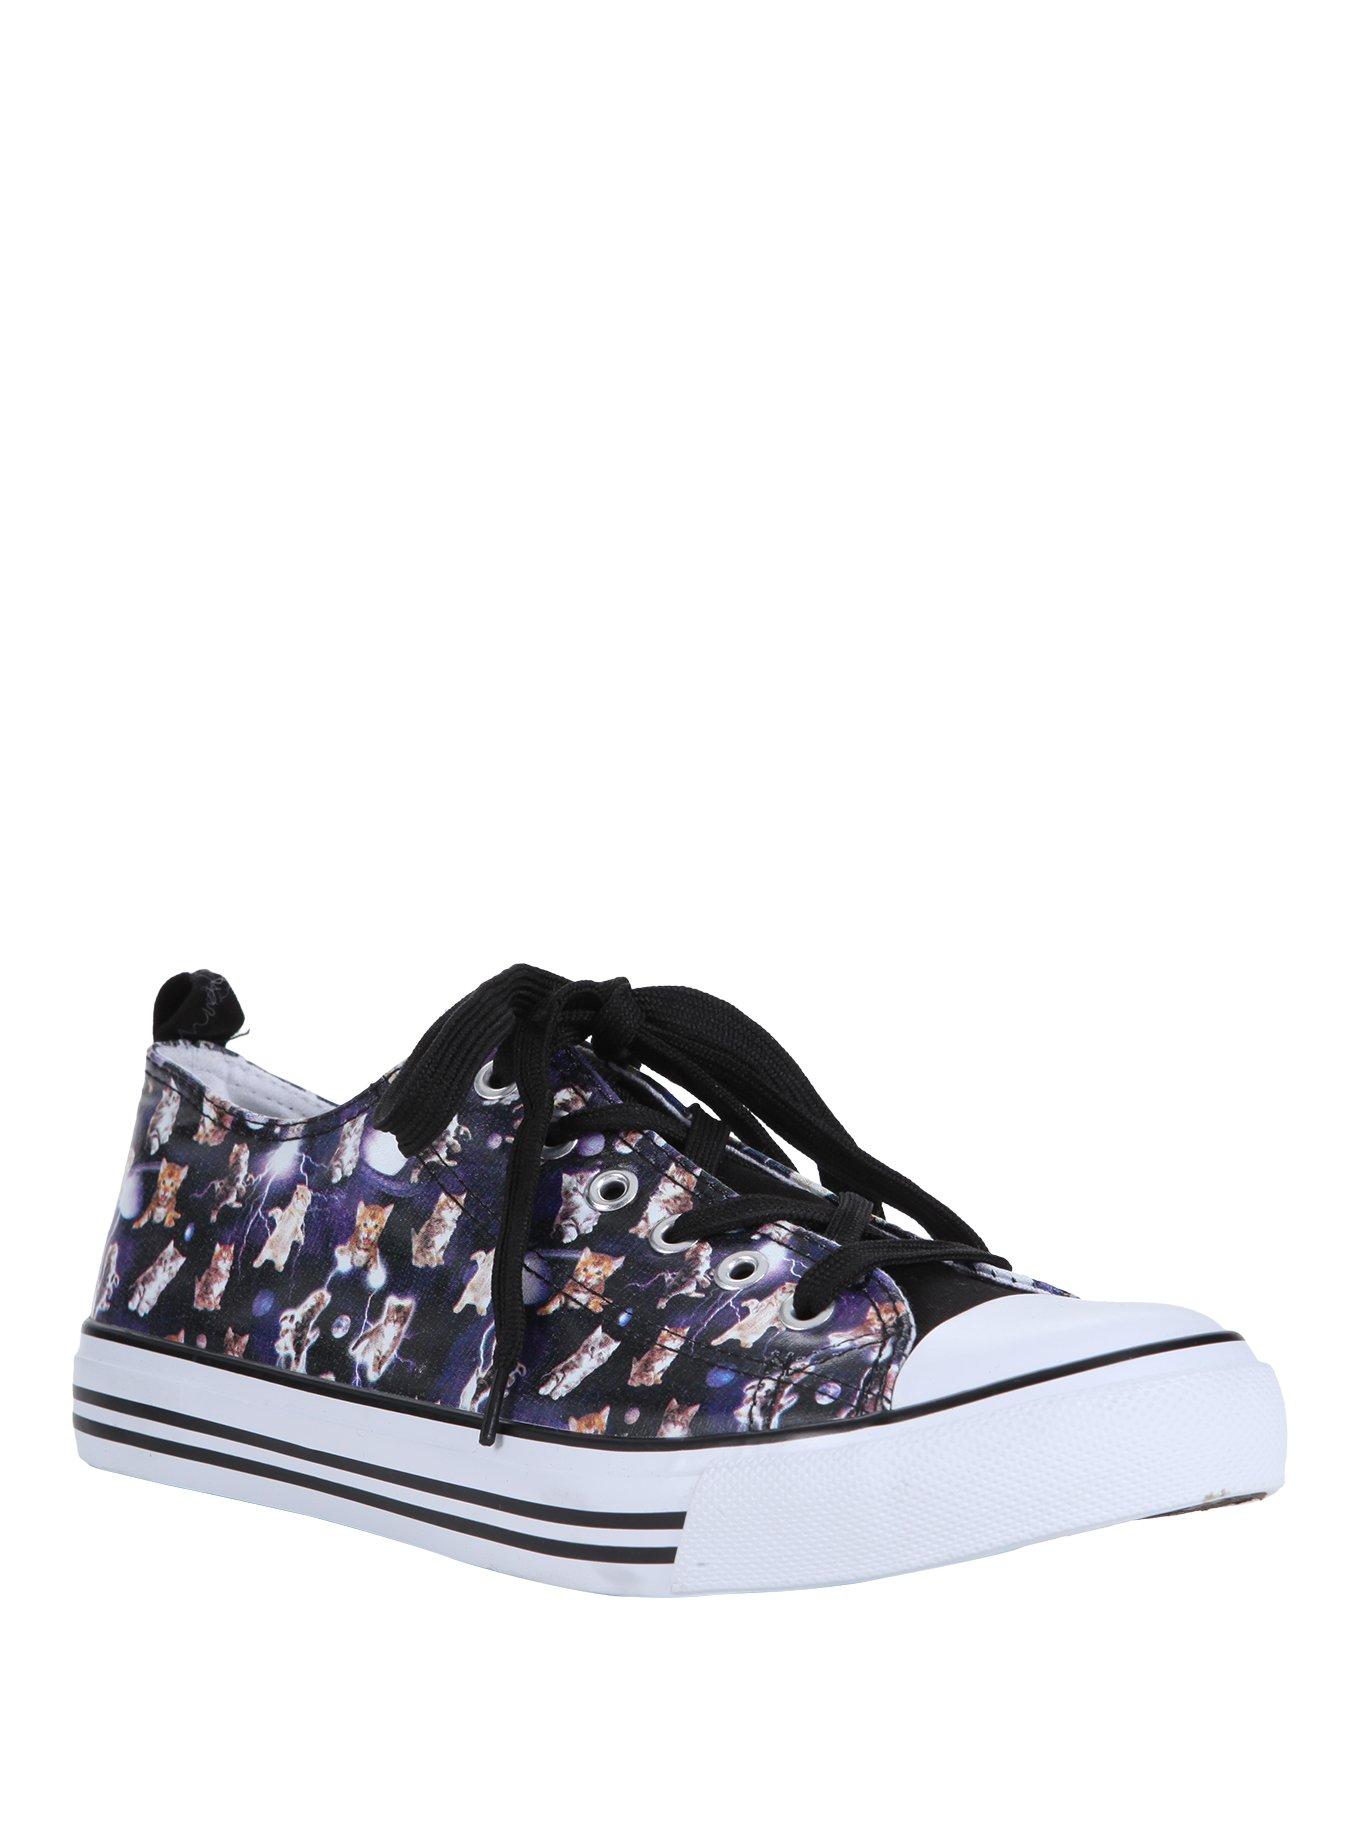 Galaxy Cats Lace-Up Sneakers, BLACK, hi-res